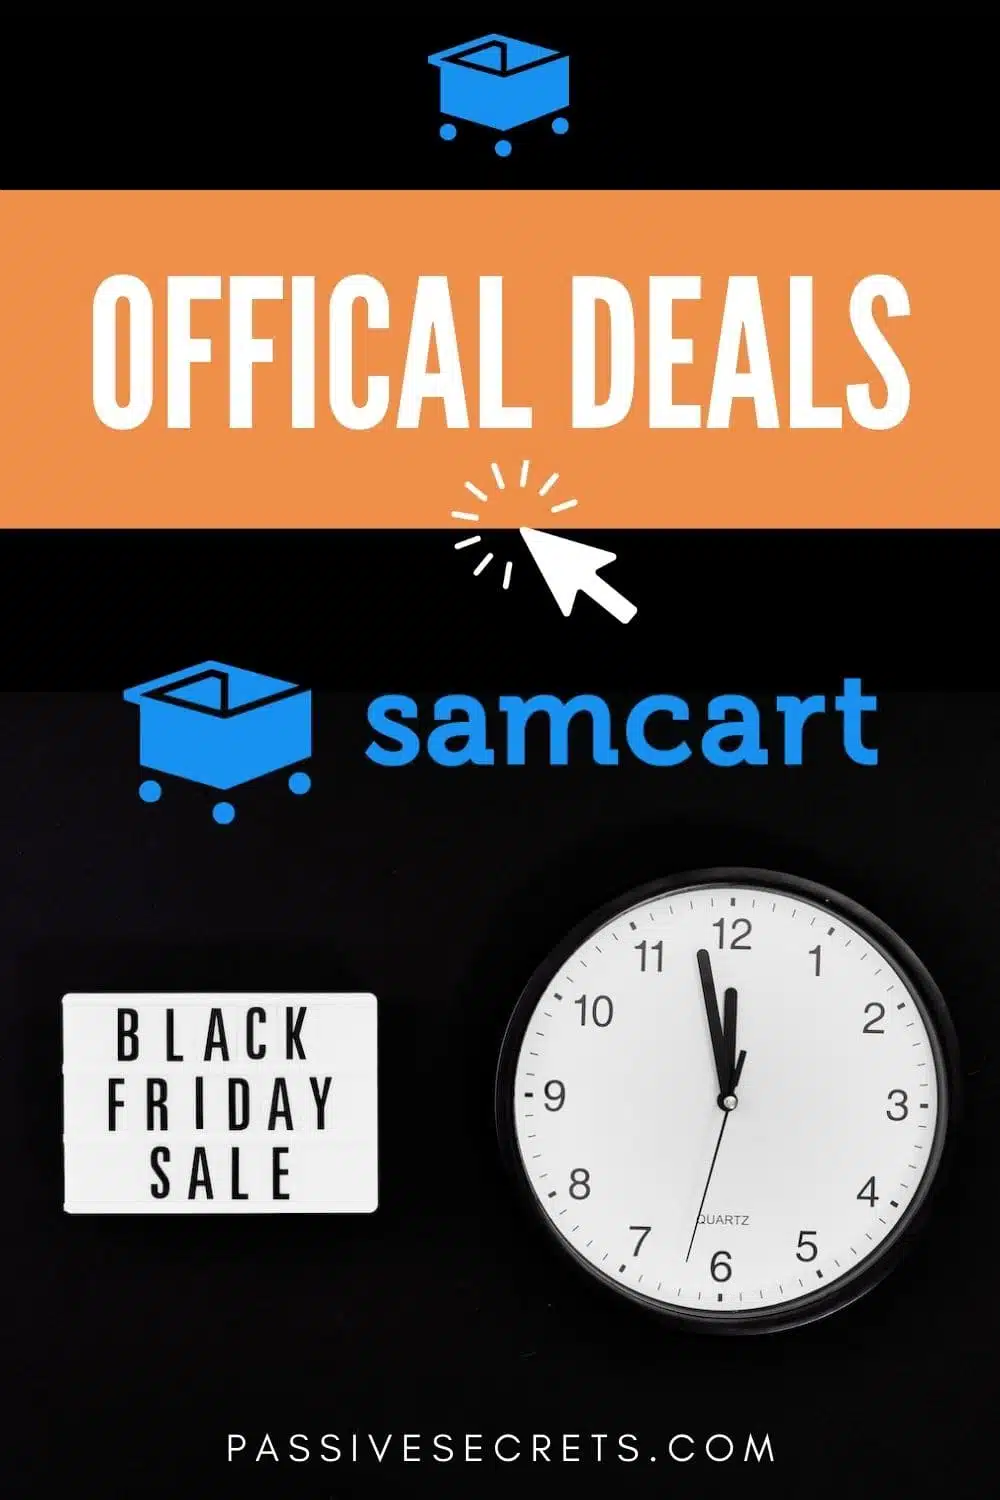 SamCart black friday and cyber monday sales deals PassiveSecrets